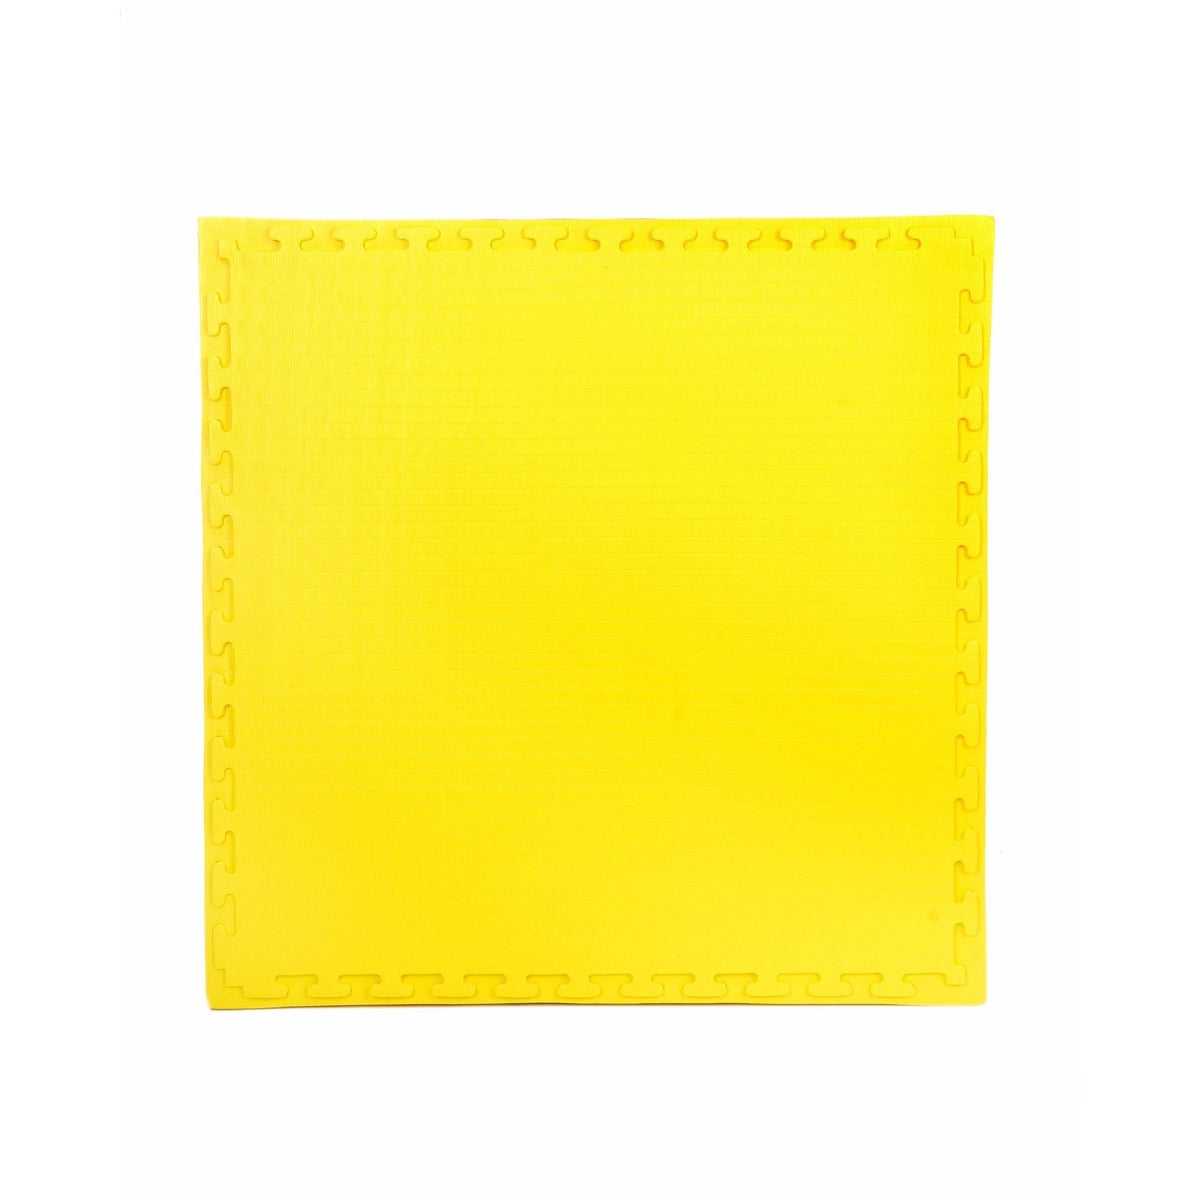 Cannons UK Premium Yellow and Blue 40mm Tatami MMA Jigsaw Mats from just £30.99 inc VAT and free Delivery - Cannons UK